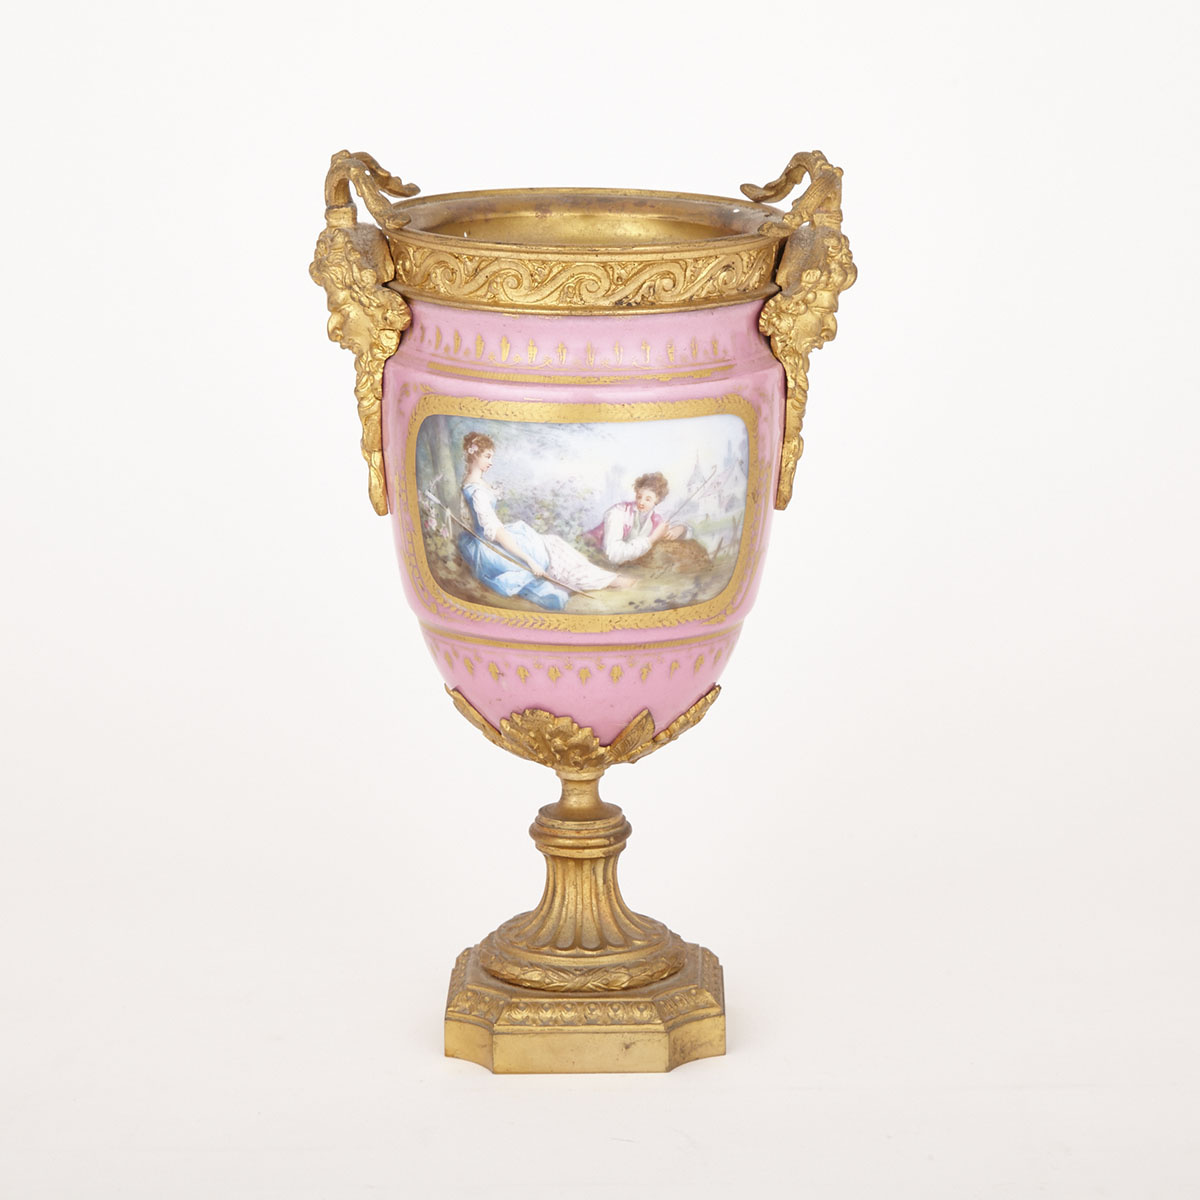 Ormolu Mounted French Porcelain Sèvres-Style Pink Ground Vase, late 19th century